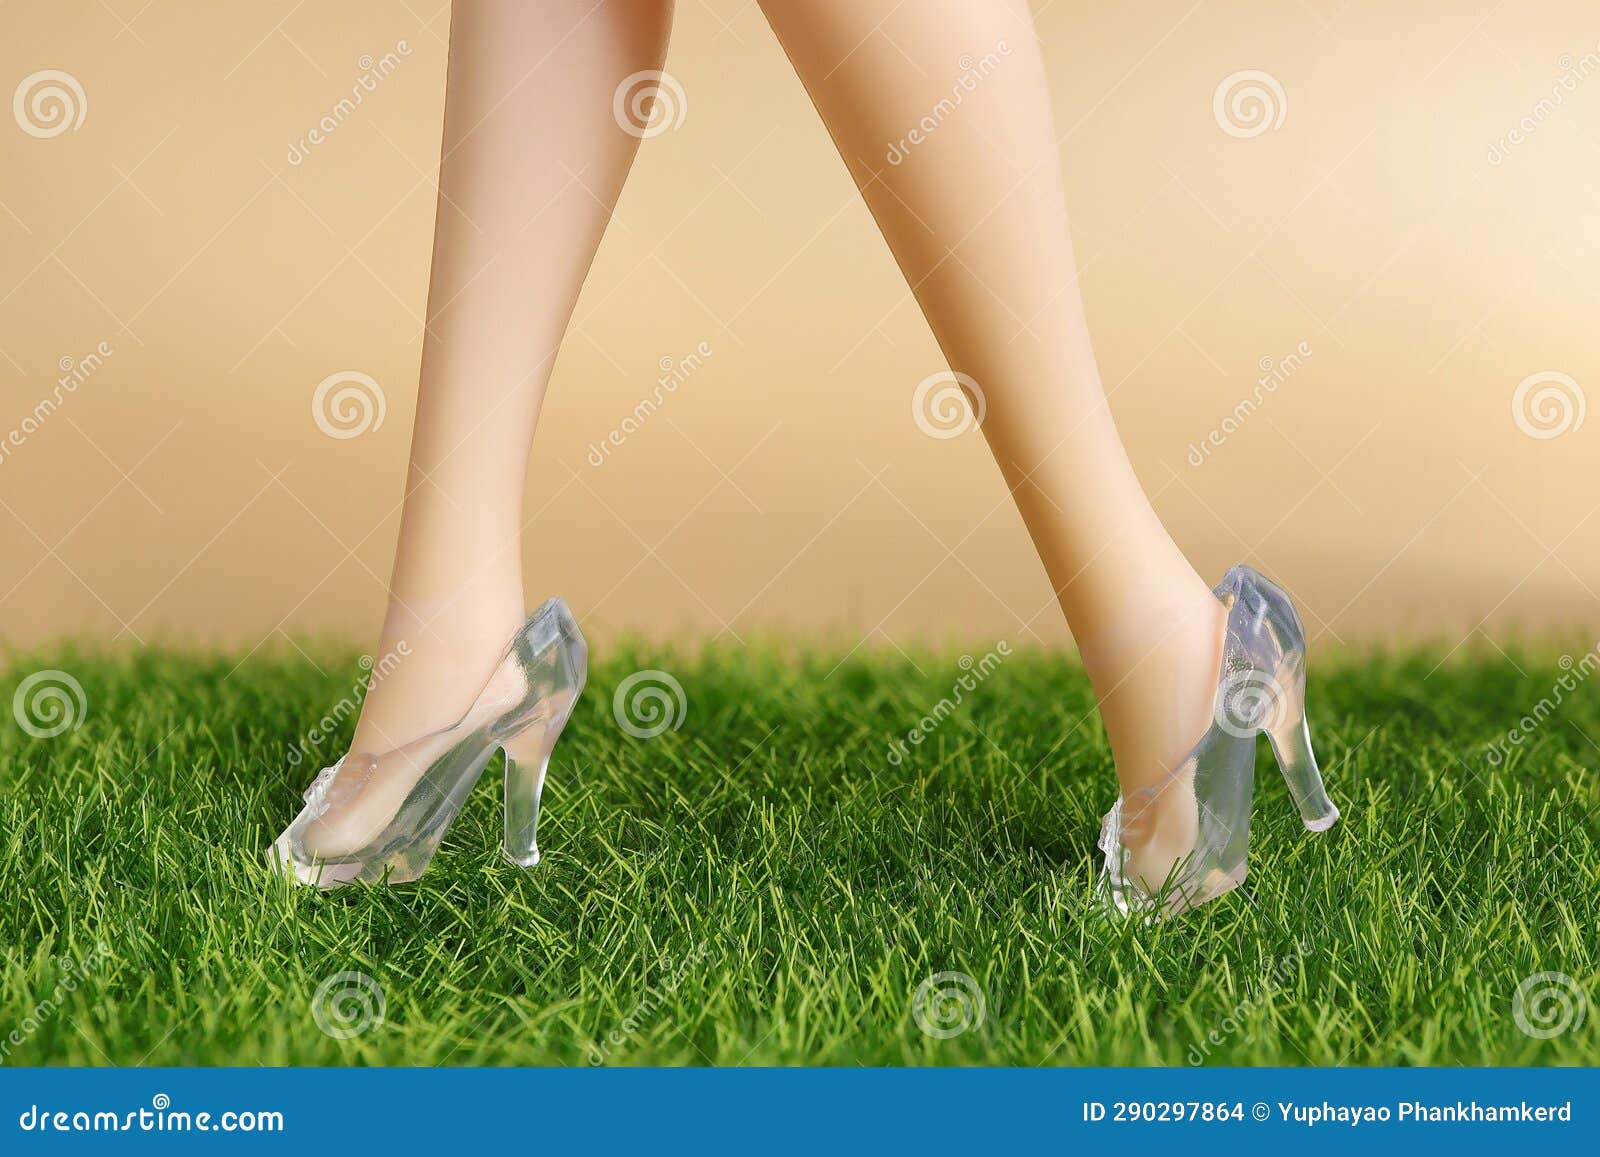 Can This Product Stop Heels From Sinking In Grass? - YouTube